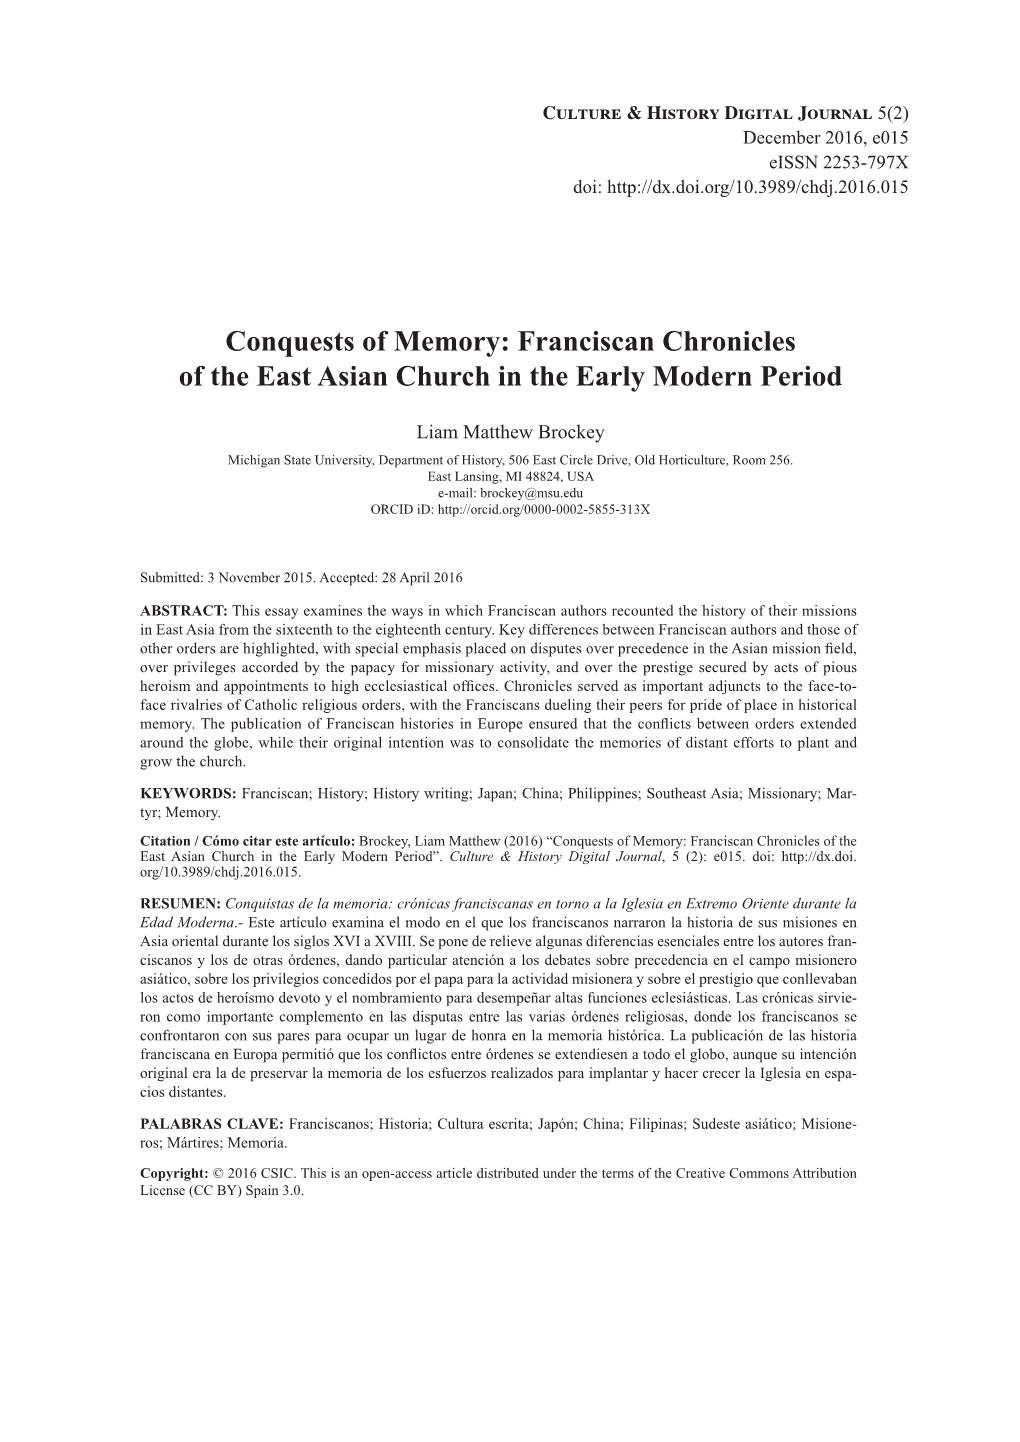 Franciscan Chronicles of the East Asian Church in the Early Modern Period